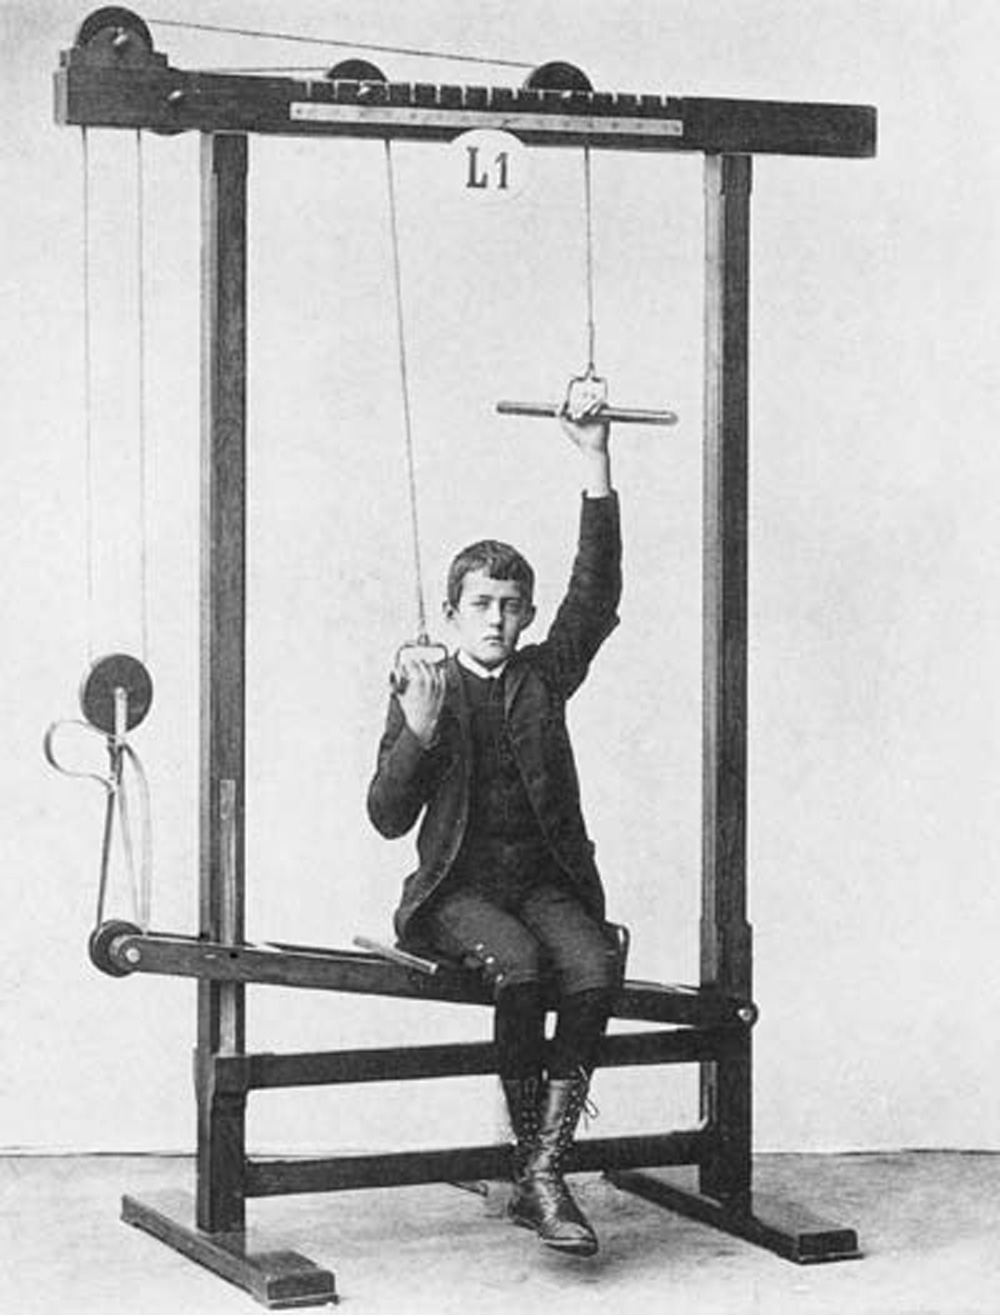 A nineteen-eighties photograph of a boy in a suit holding on to pulleys on a Zander exercise machine.